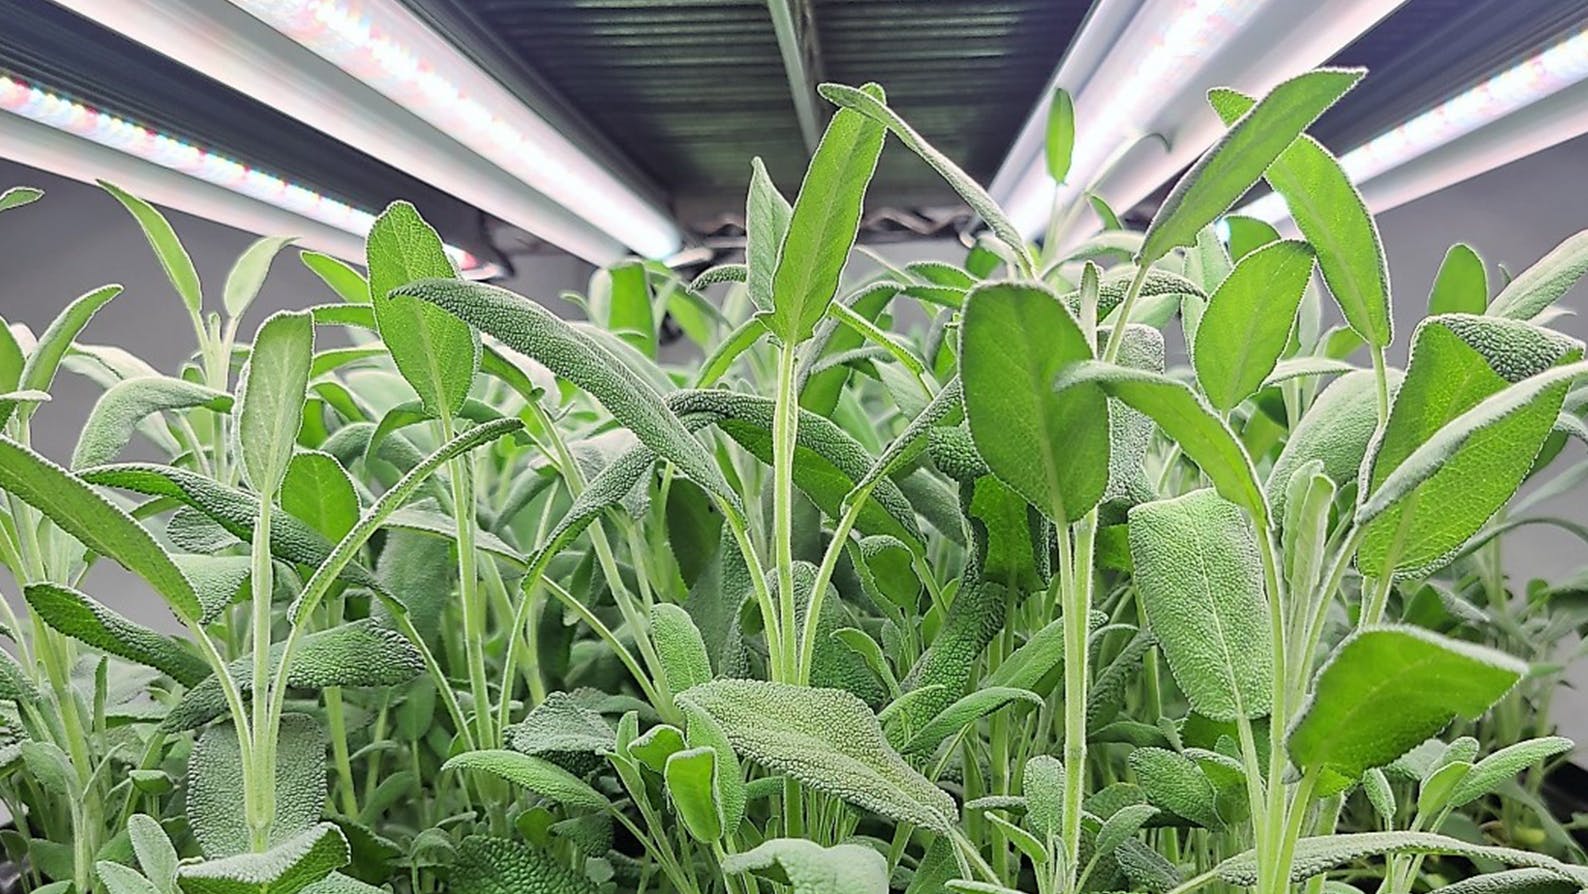 Leaves and plants in an indoor farming facility